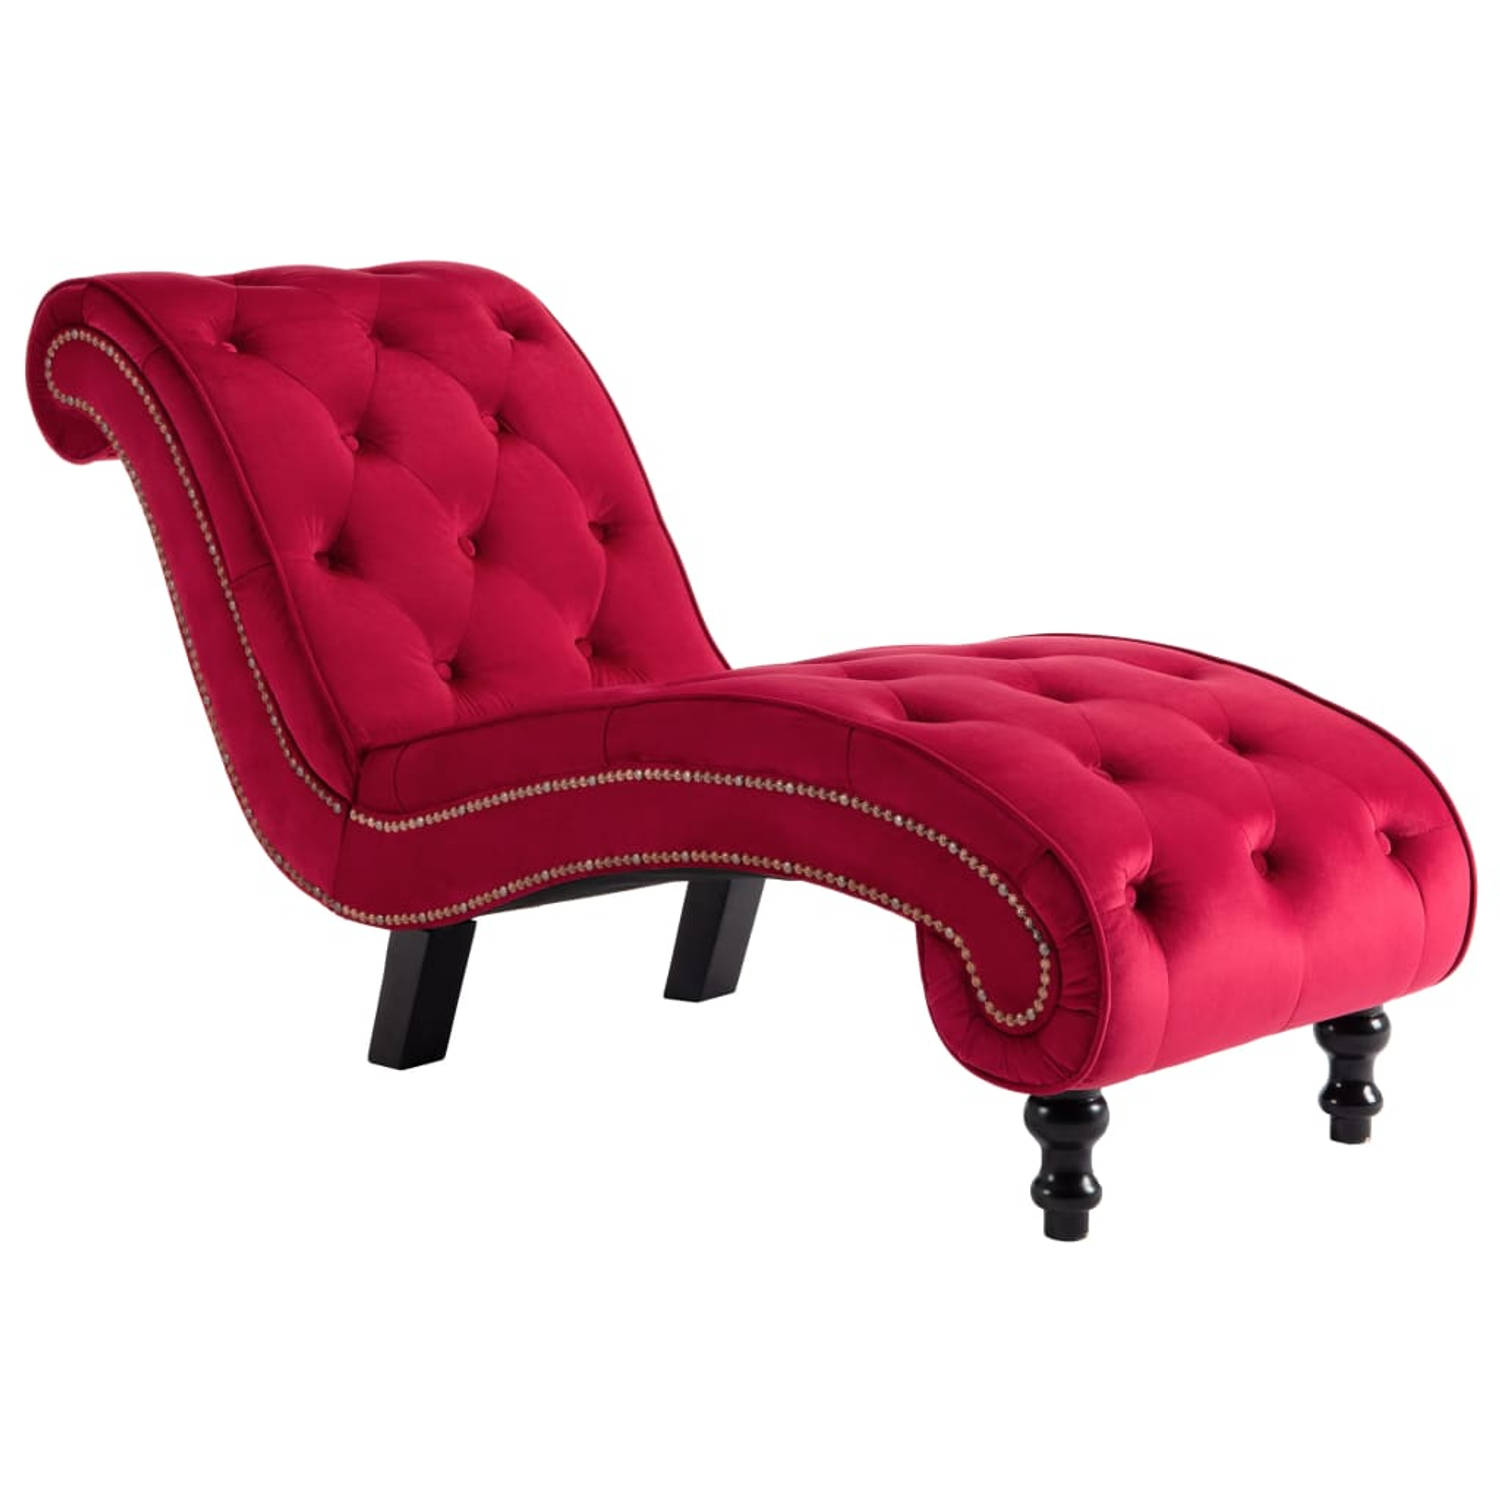 The Living Store Chaise longue fluweel rood - Chaise longue